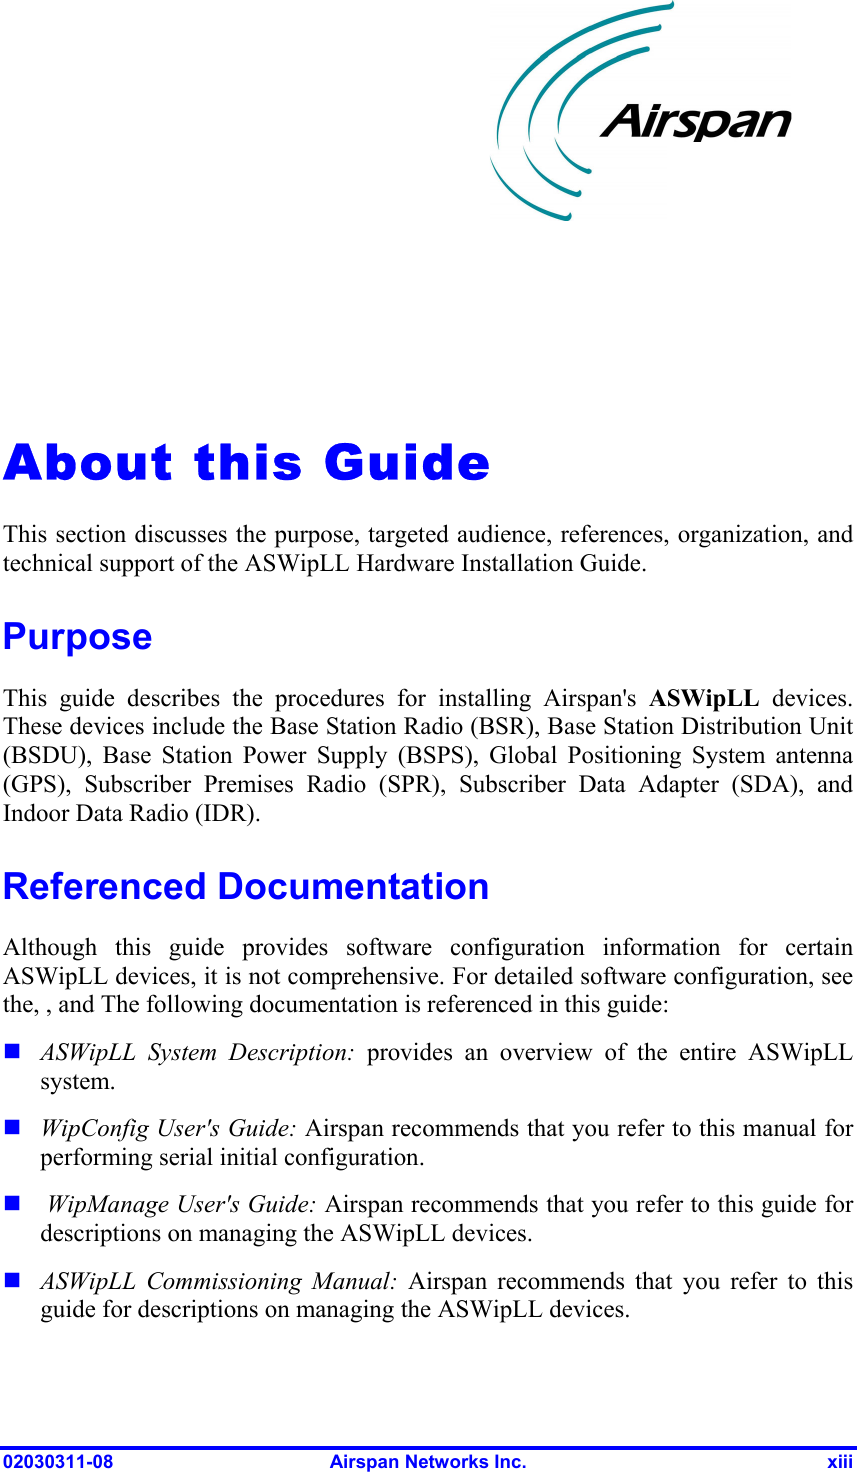  02030311-08  Airspan Networks Inc.  xiii   About this Guide This section discusses the purpose, targeted audience, references, organization, and technical support of the ASWipLL Hardware Installation Guide.  Purpose This guide describes the procedures for installing Airspan&apos;s ASWipLL devices. These devices include the Base Station Radio (BSR), Base Station Distribution Unit (BSDU), Base Station Power Supply (BSPS), Global Positioning System antenna (GPS), Subscriber Premises Radio (SPR), Subscriber Data Adapter (SDA), and Indoor Data Radio (IDR). Referenced Documentation Although this guide provides software configuration information for certain ASWipLL devices, it is not comprehensive. For detailed software configuration, see the, , and The following documentation is referenced in this guide:  ASWipLL System Description: provides an overview of the entire ASWipLL system.  WipConfig User&apos;s Guide: Airspan recommends that you refer to this manual for performing serial initial configuration.   WipManage User&apos;s Guide: Airspan recommends that you refer to this guide for descriptions on managing the ASWipLL devices.  ASWipLL Commissioning Manual: Airspan recommends that you refer to this guide for descriptions on managing the ASWipLL devices.  